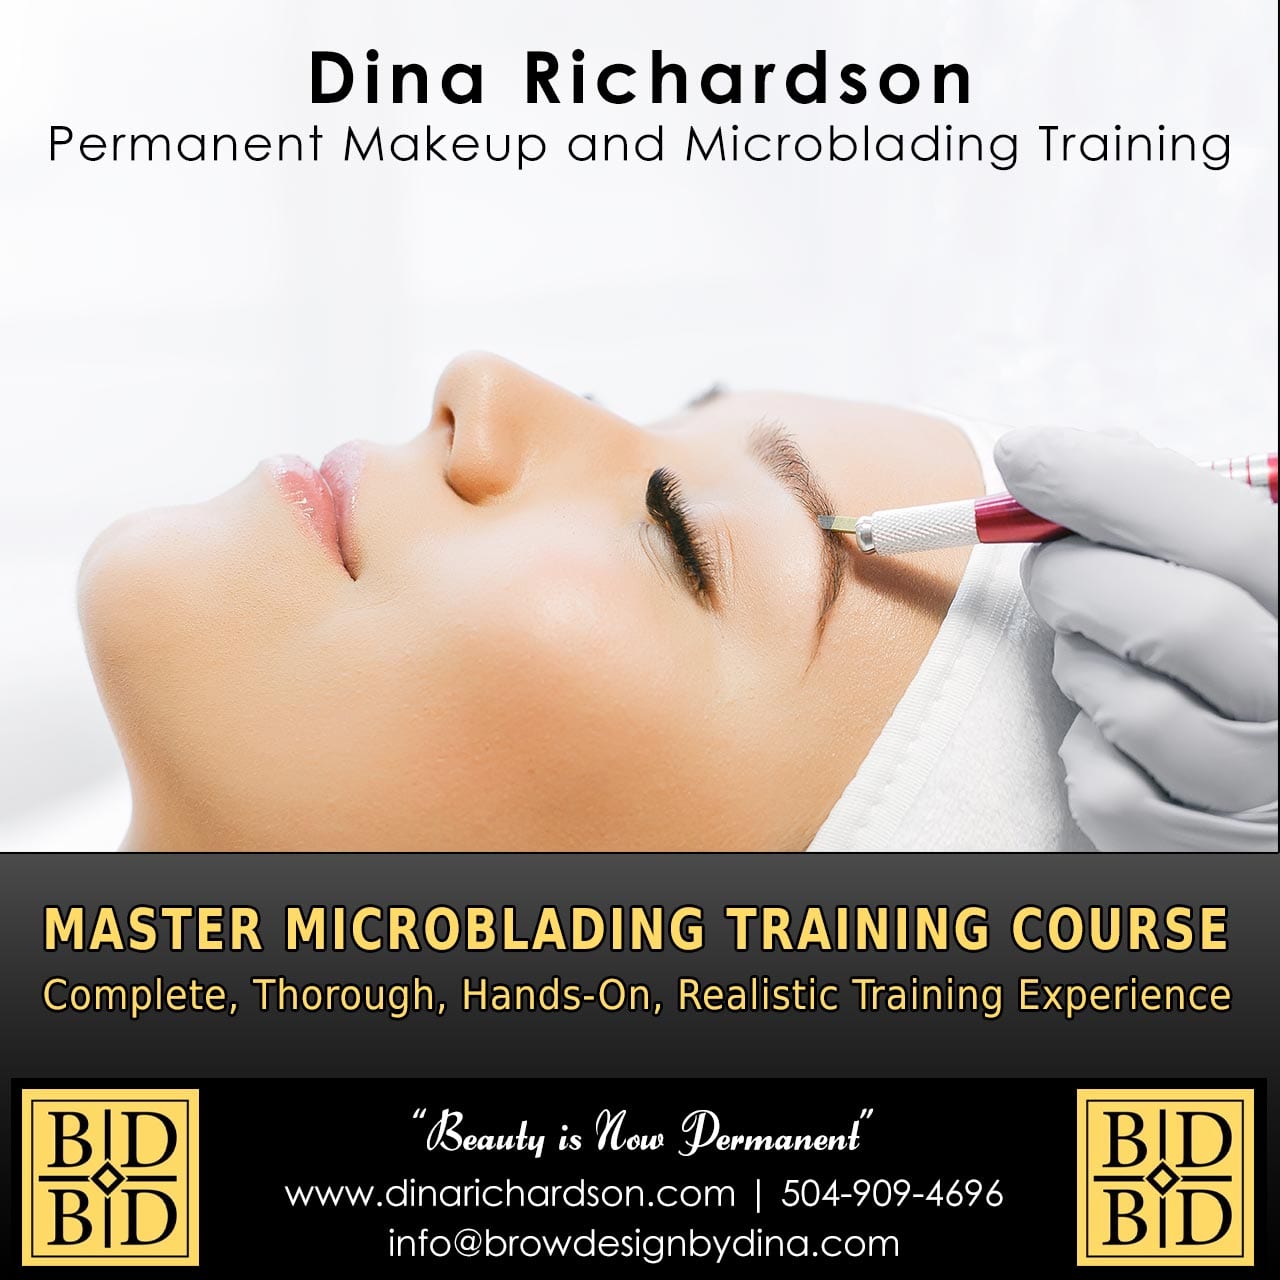 Permanent Makeup and Microblading Training